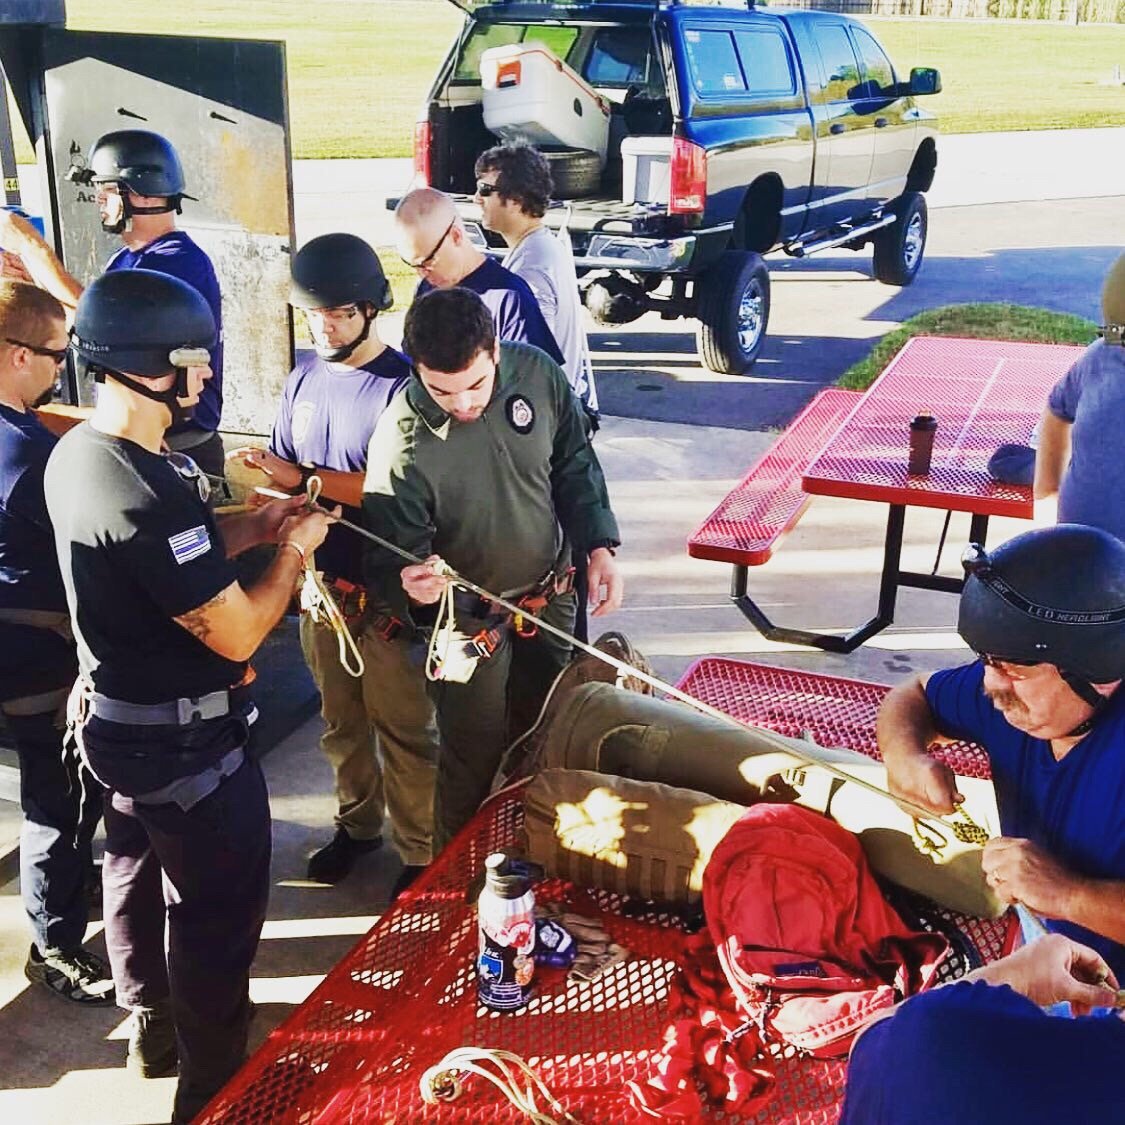 Tri-Med Tactical: “Nothing better than the smell of #kevlar rope from @TacticalMedical #RescueCraft in the morning during dynamic extraction course of #ATOMS.
.
#medicup #stickyonthehole #specops #swat #k9medicine #tacticalmedicine #medicalspecialist #TEMS #TECC #TCCC #NFPA3000